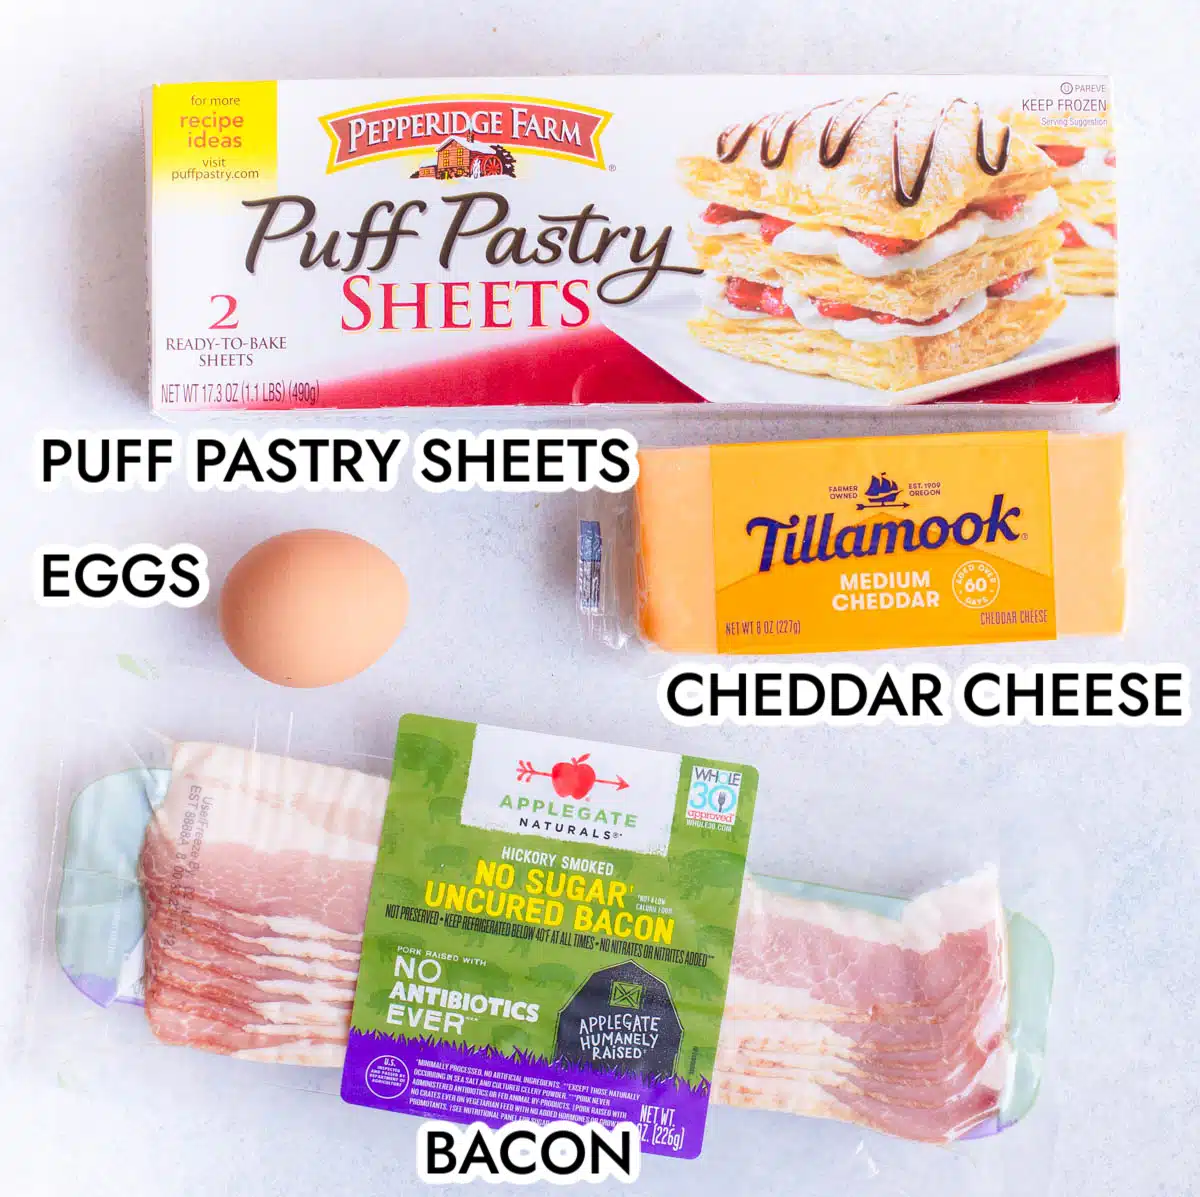 Ingredients in Bacon Cheese Turnovers including puff pastry sheets, cheddar cheese, an egg, and bacon.